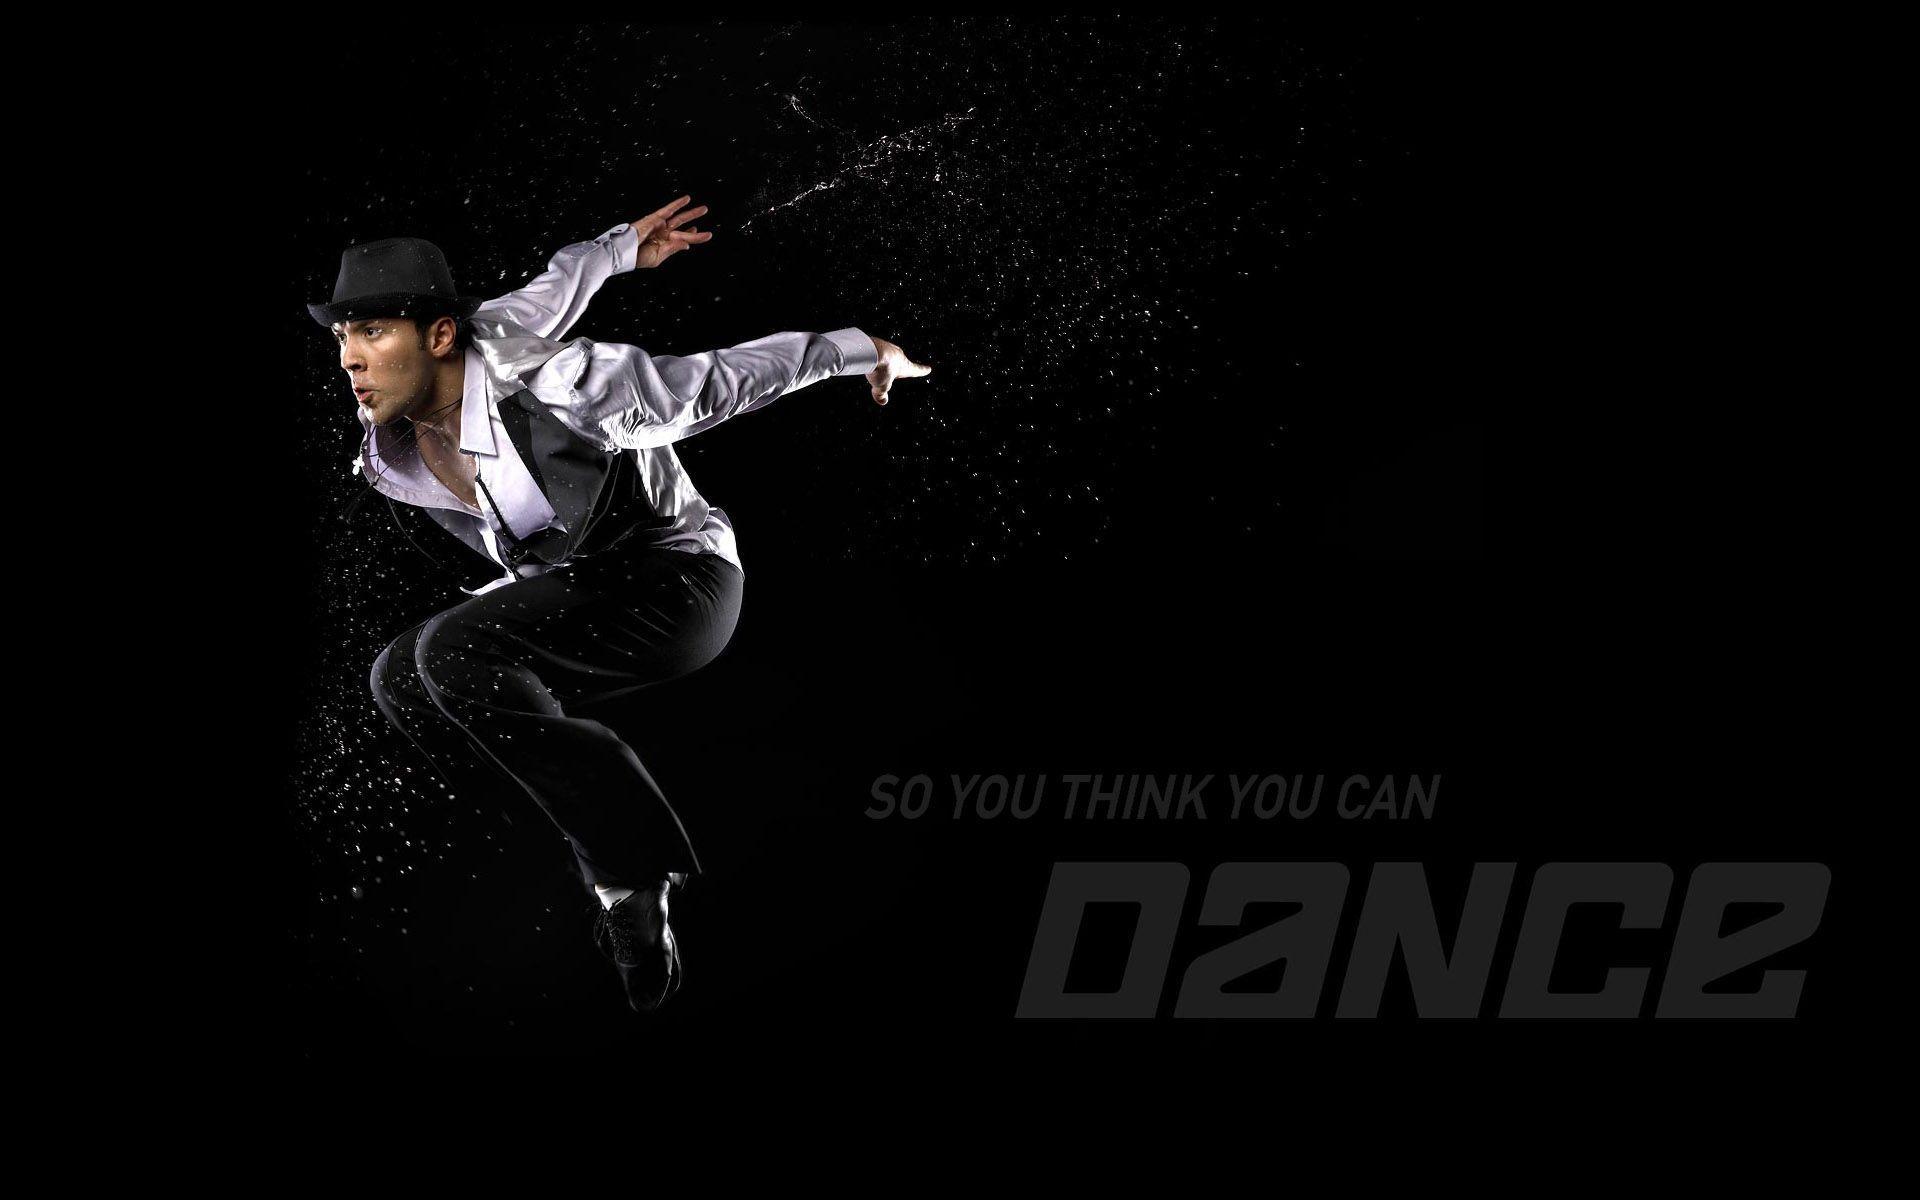 So You Think You Can Dance Wallpaper. So You Think You Can